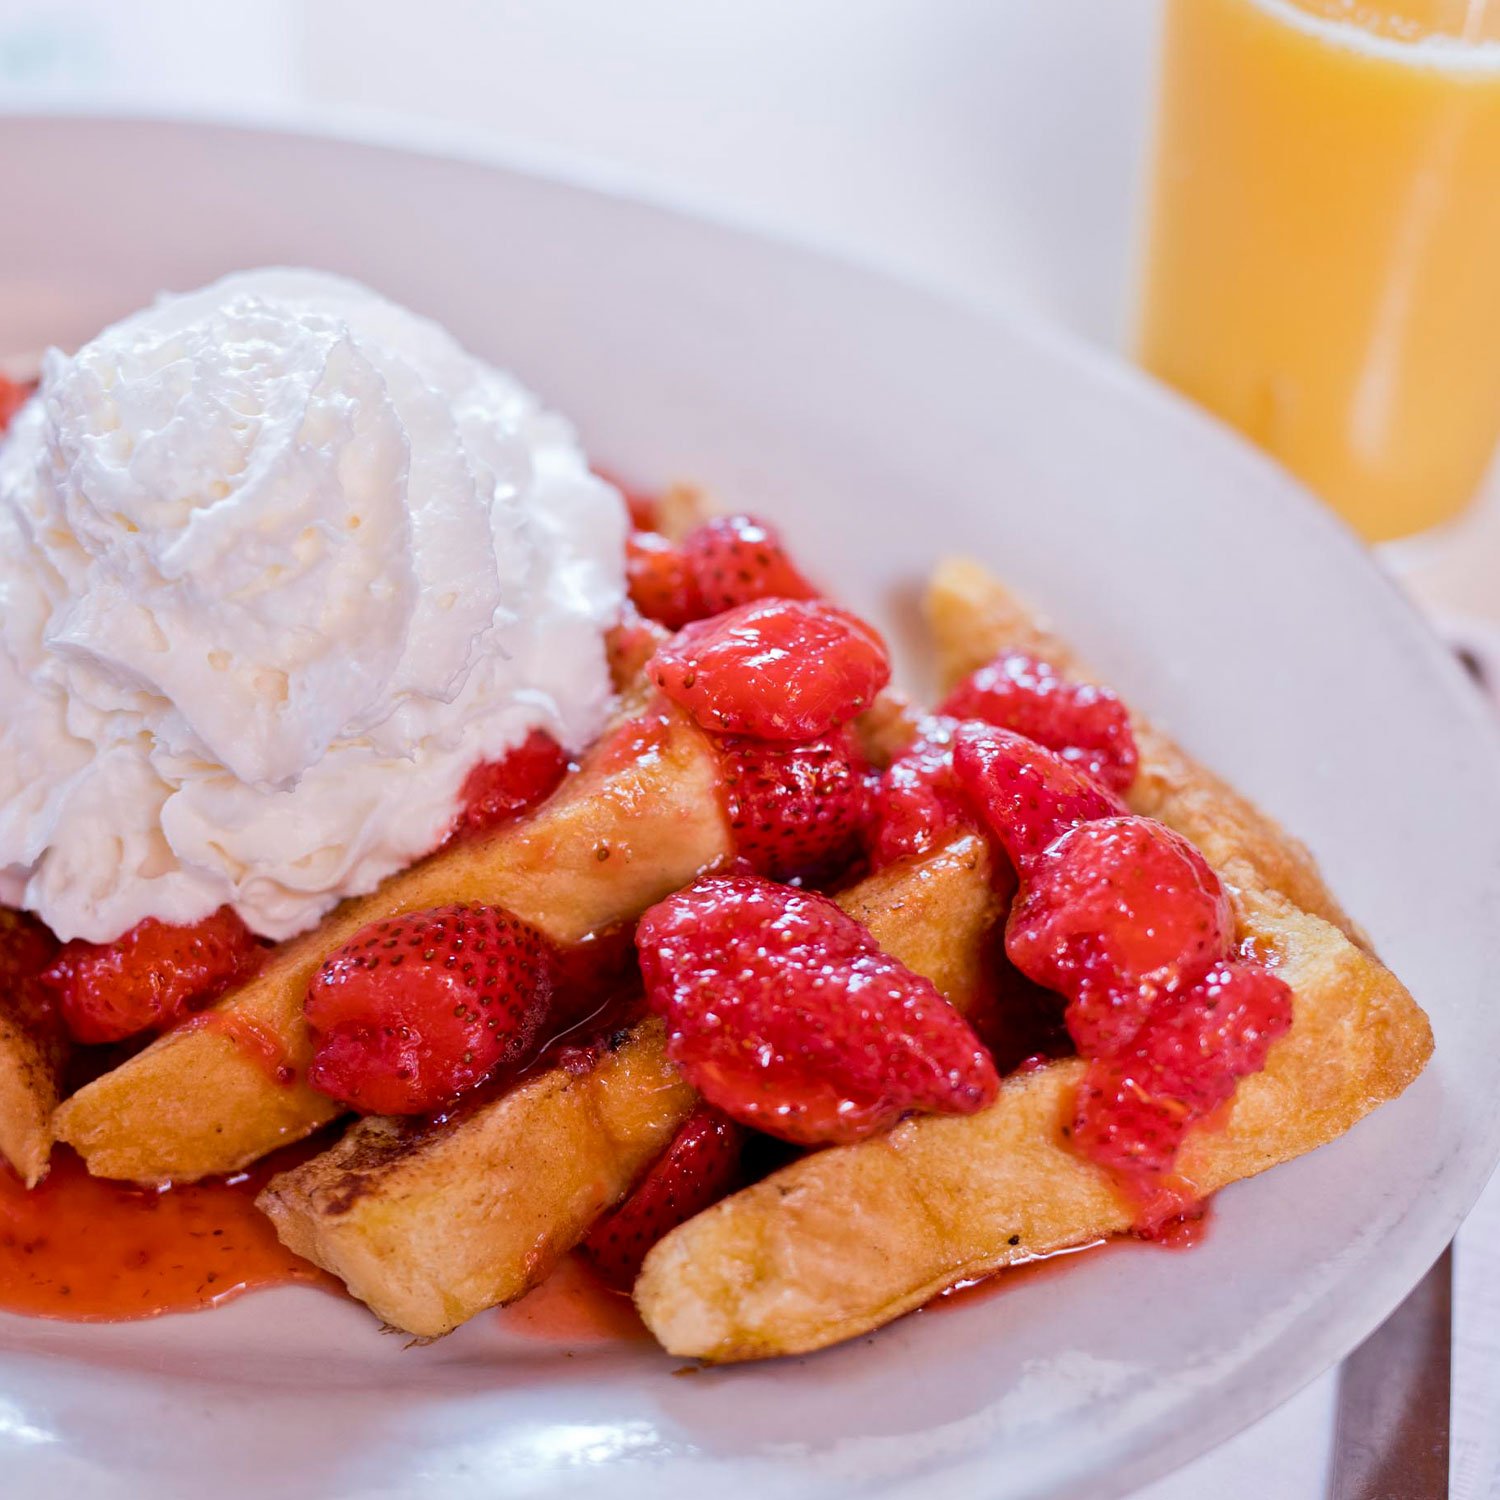  delicious plate of french toast with real maple syrup, strawberries and whipped cream 